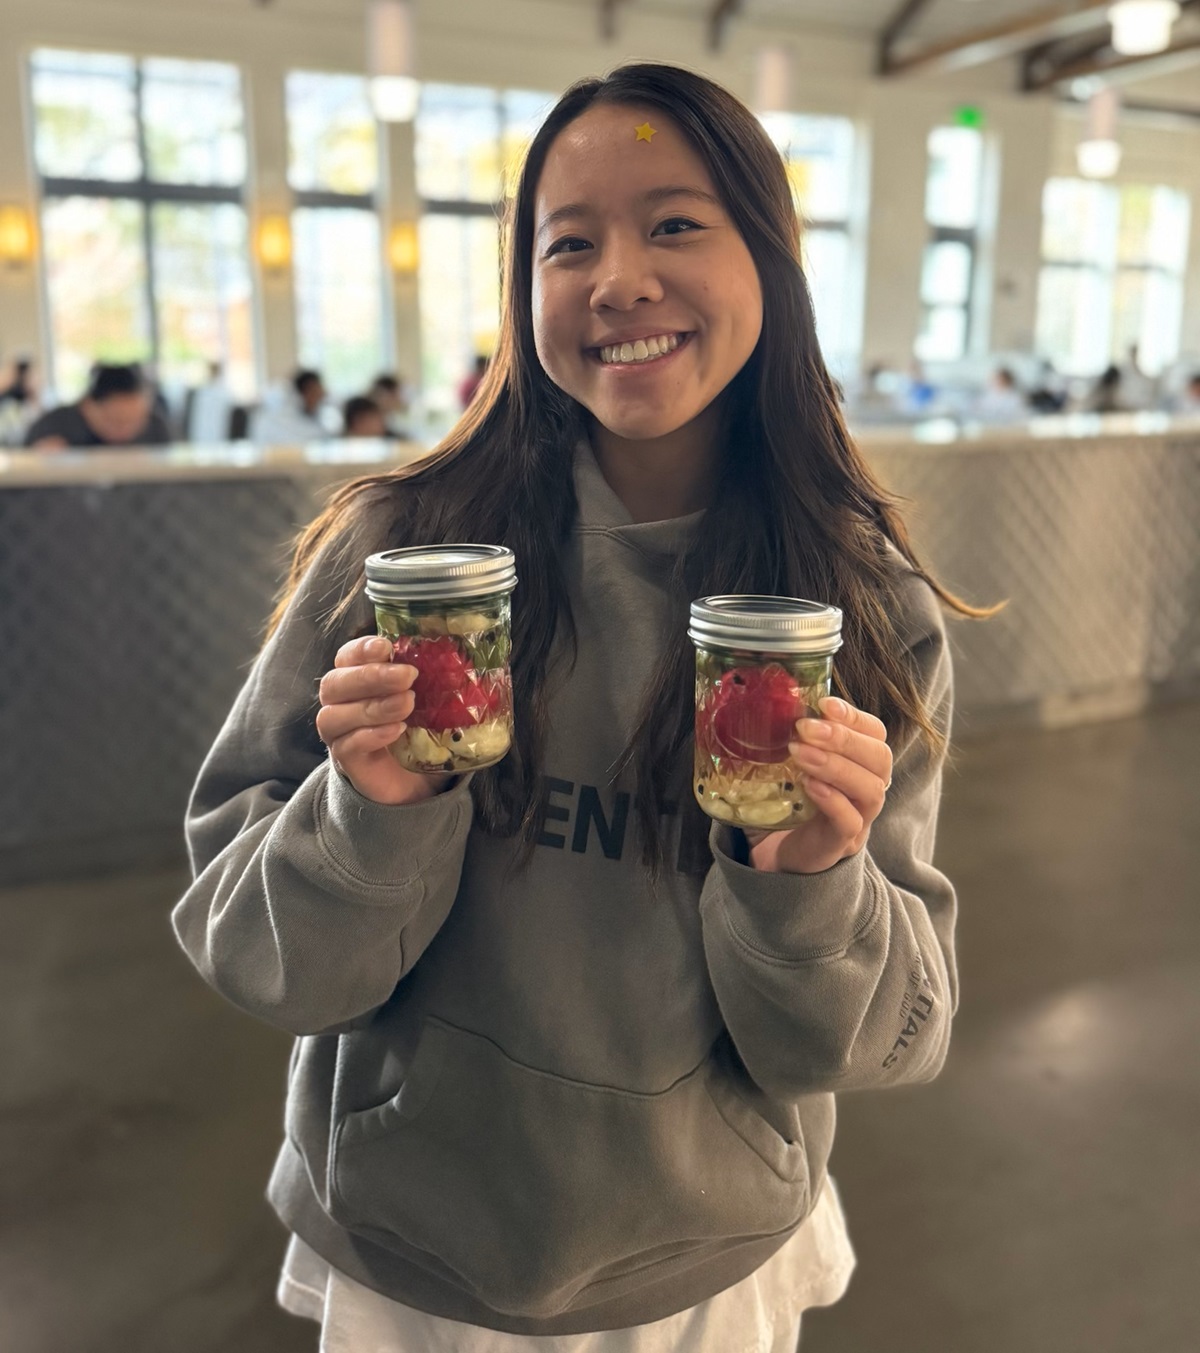 A smiling young woman with long brown hair holds up two jars of pickles